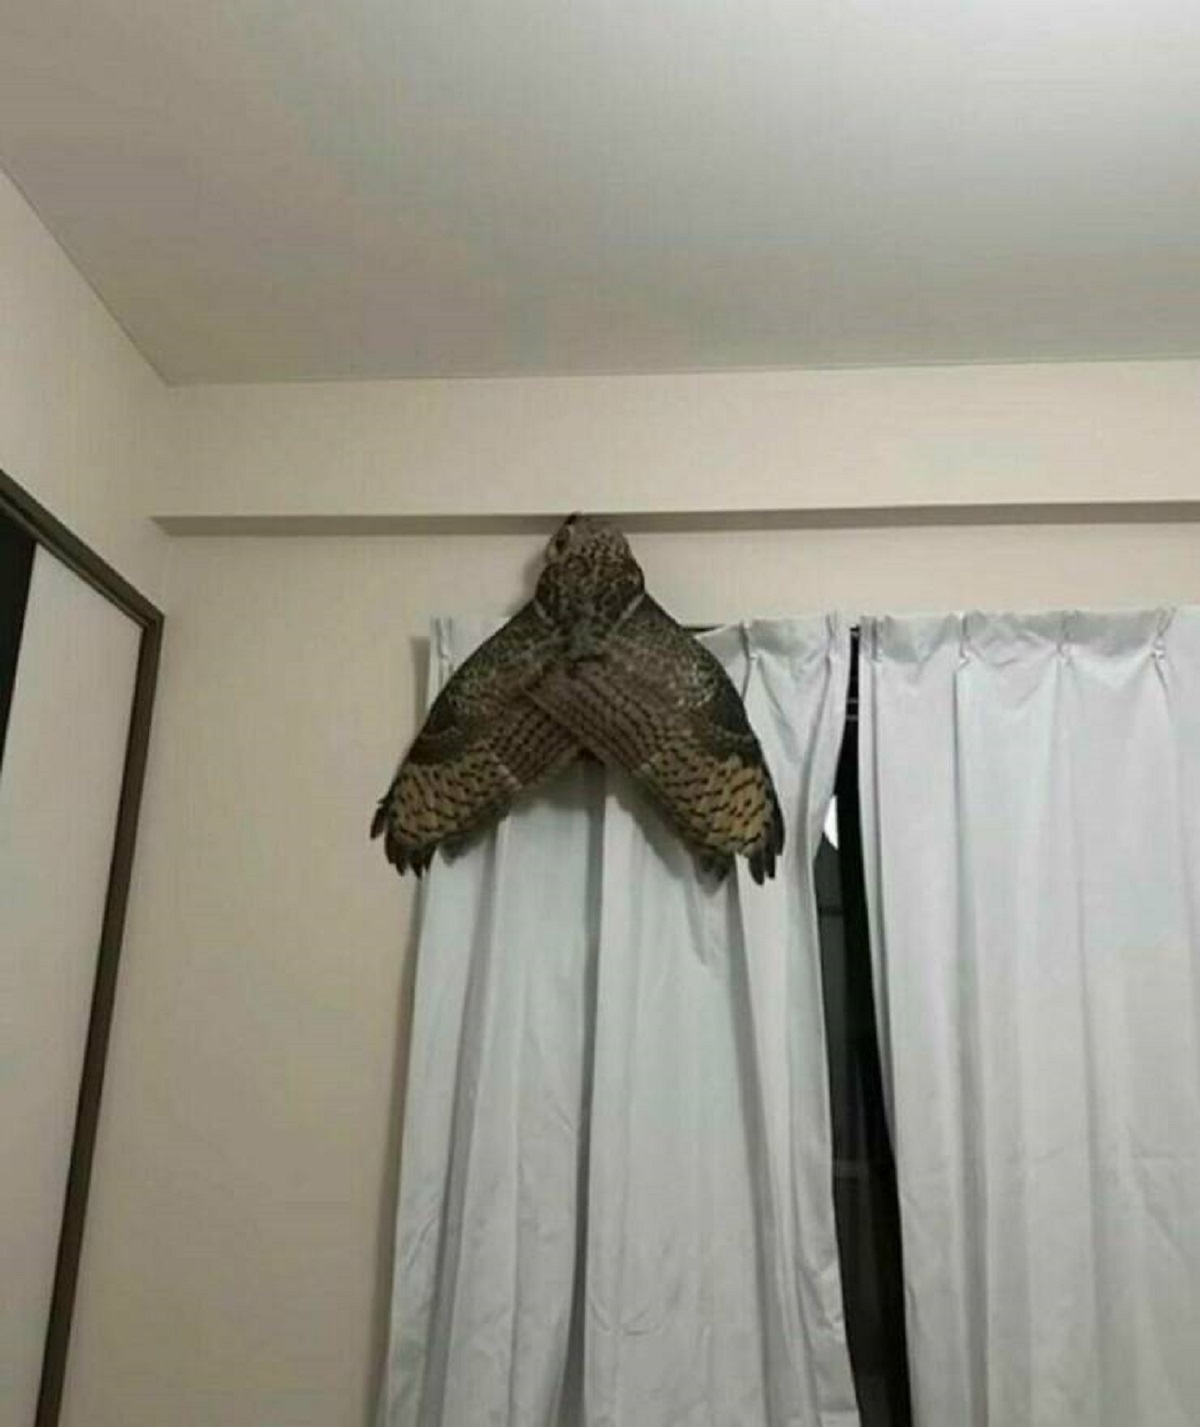 "This Owl On A Curtain Looks Like A Gigantic Moth"